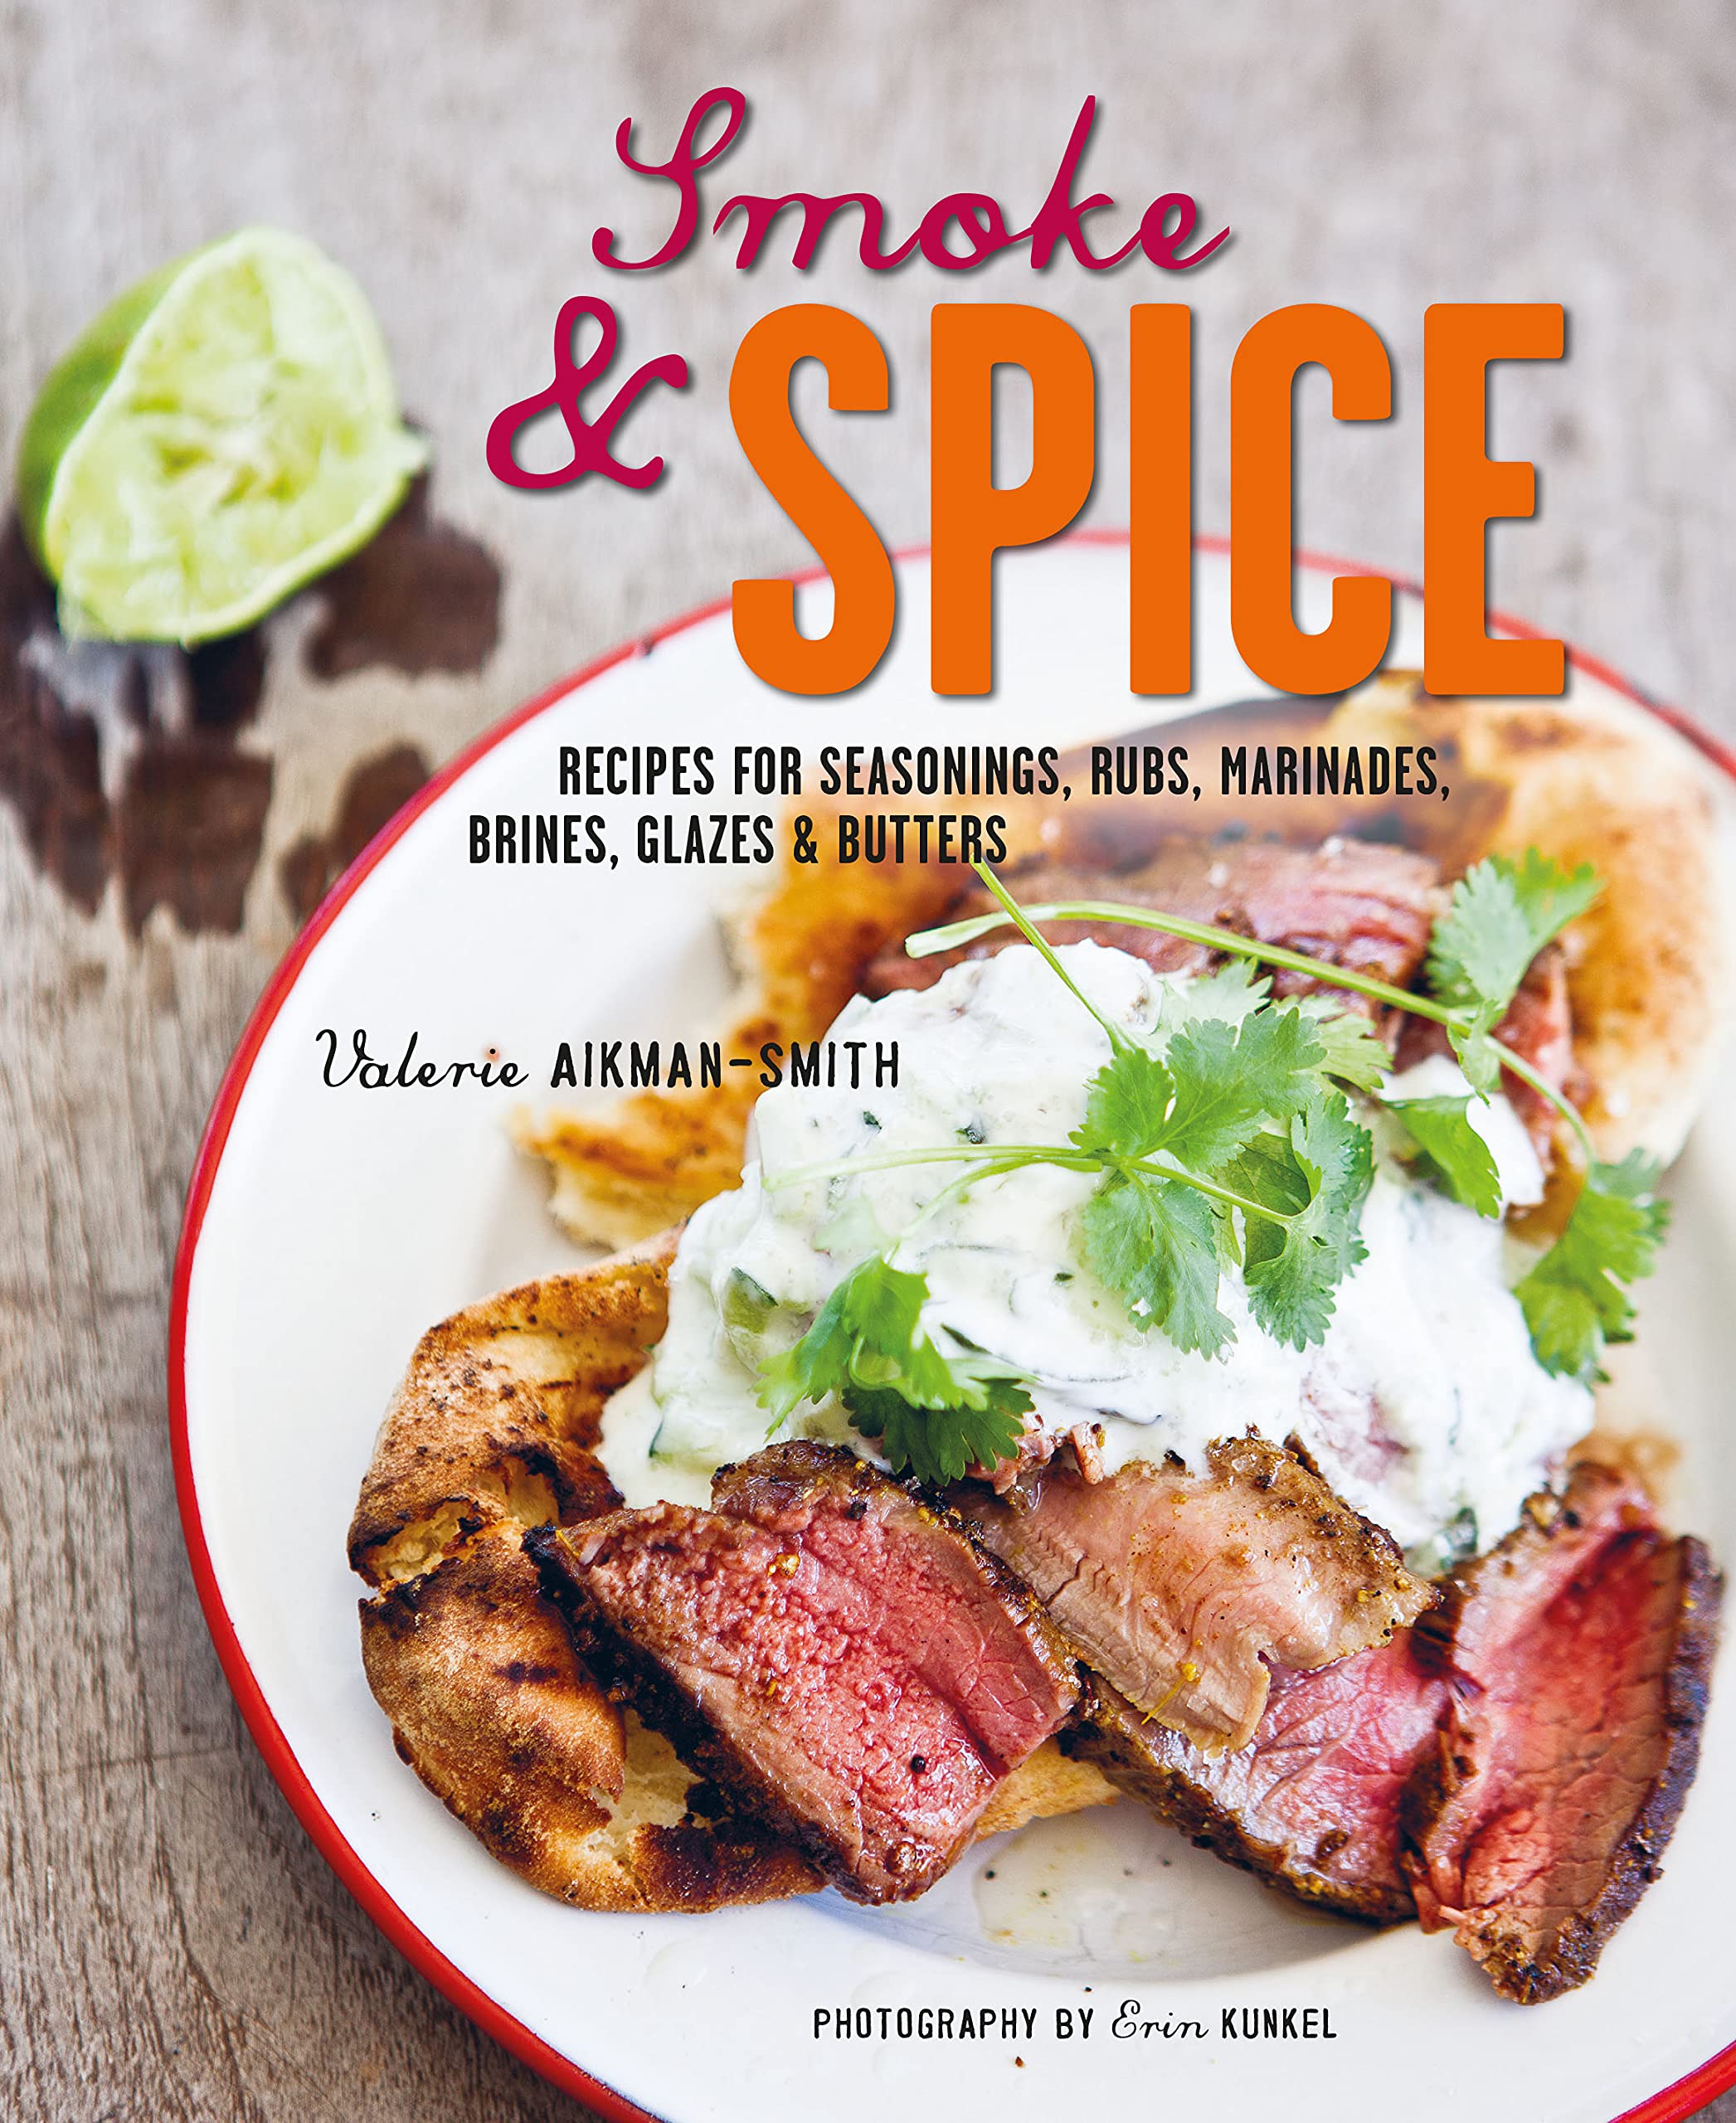 Smoke & Spice: Recipes for Seasonings, Rubs, Marinades, Brines, Glazes & Butters (Valerie Aikman-Smith)